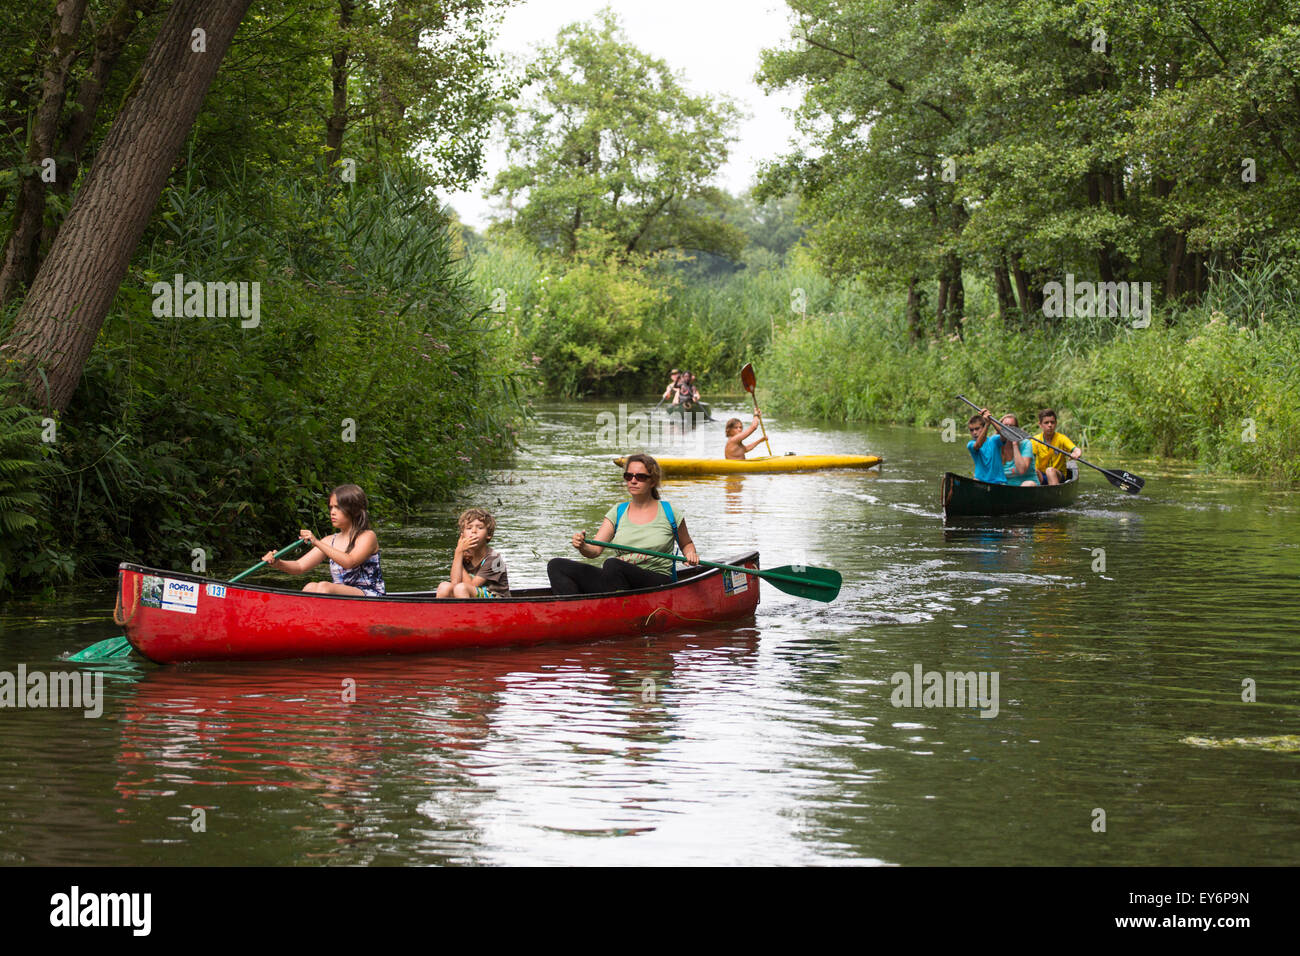 Canoeing family tourists boating at meandering river the 'Dommel' in the Netherlands Stock Photo